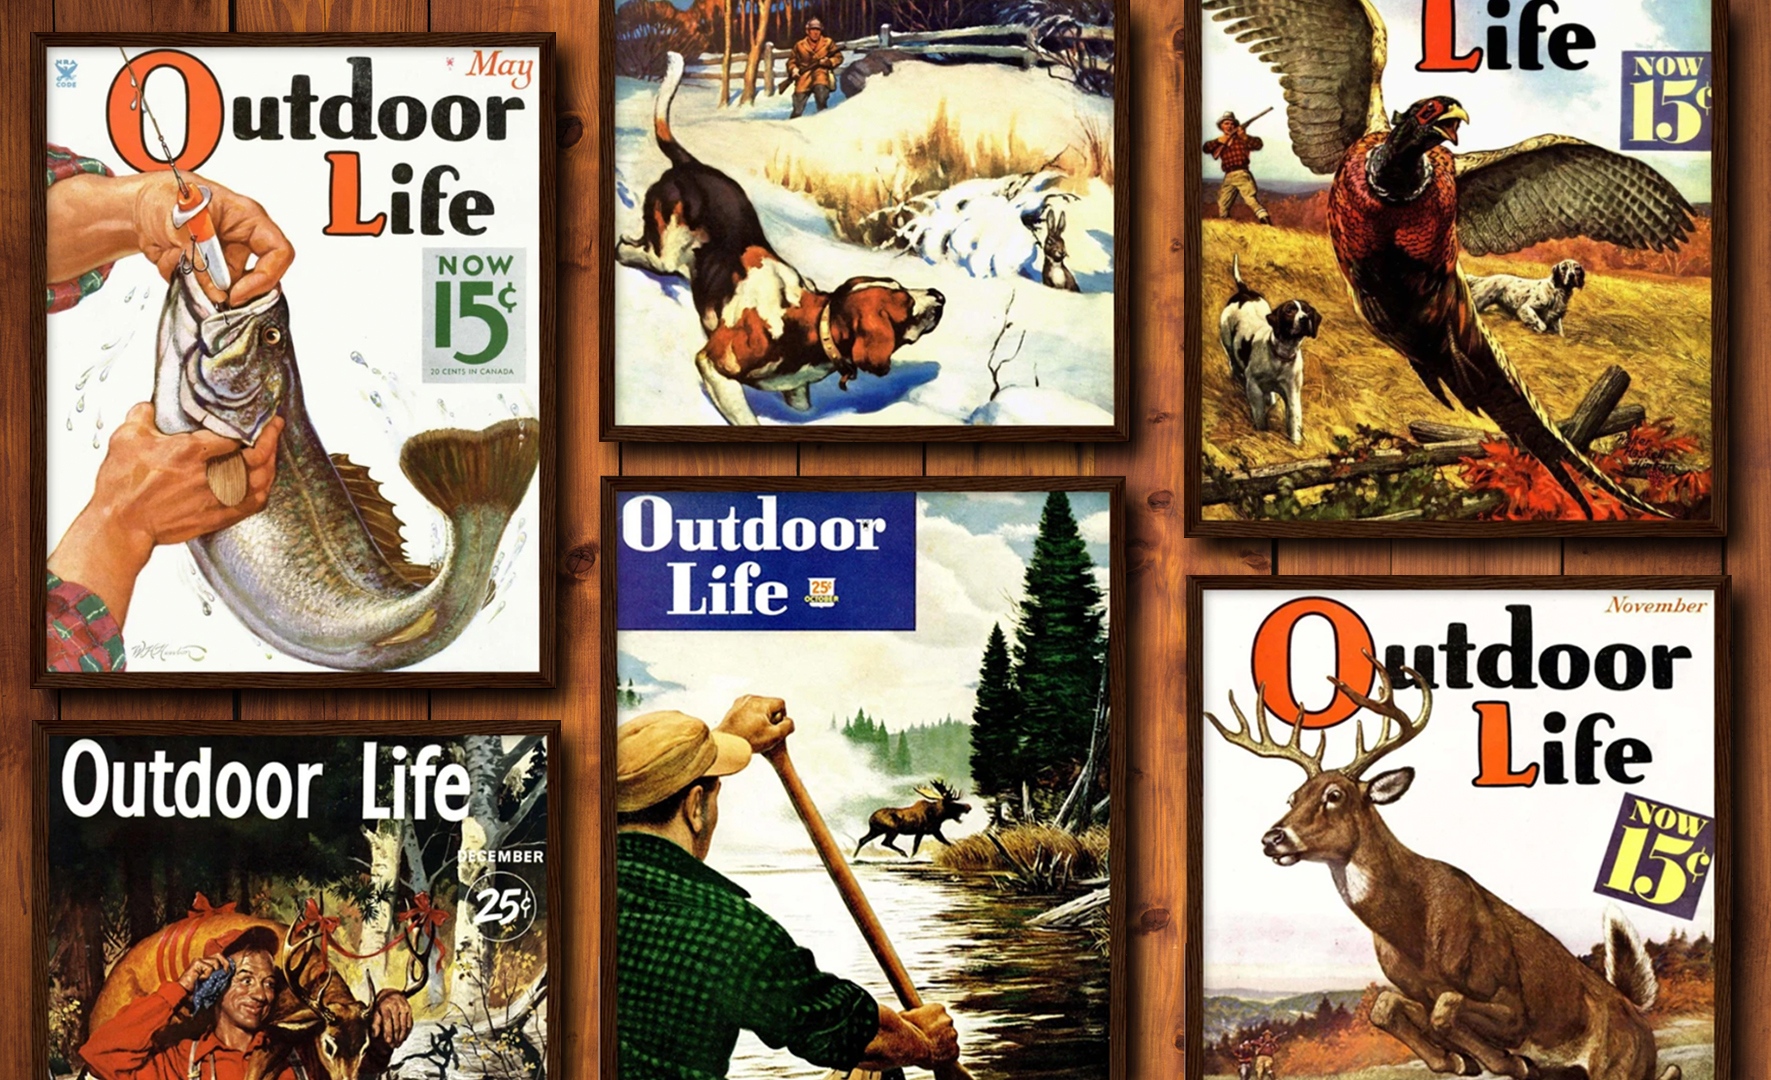 Outdoor Life cover art is now available for sale and gift giving.